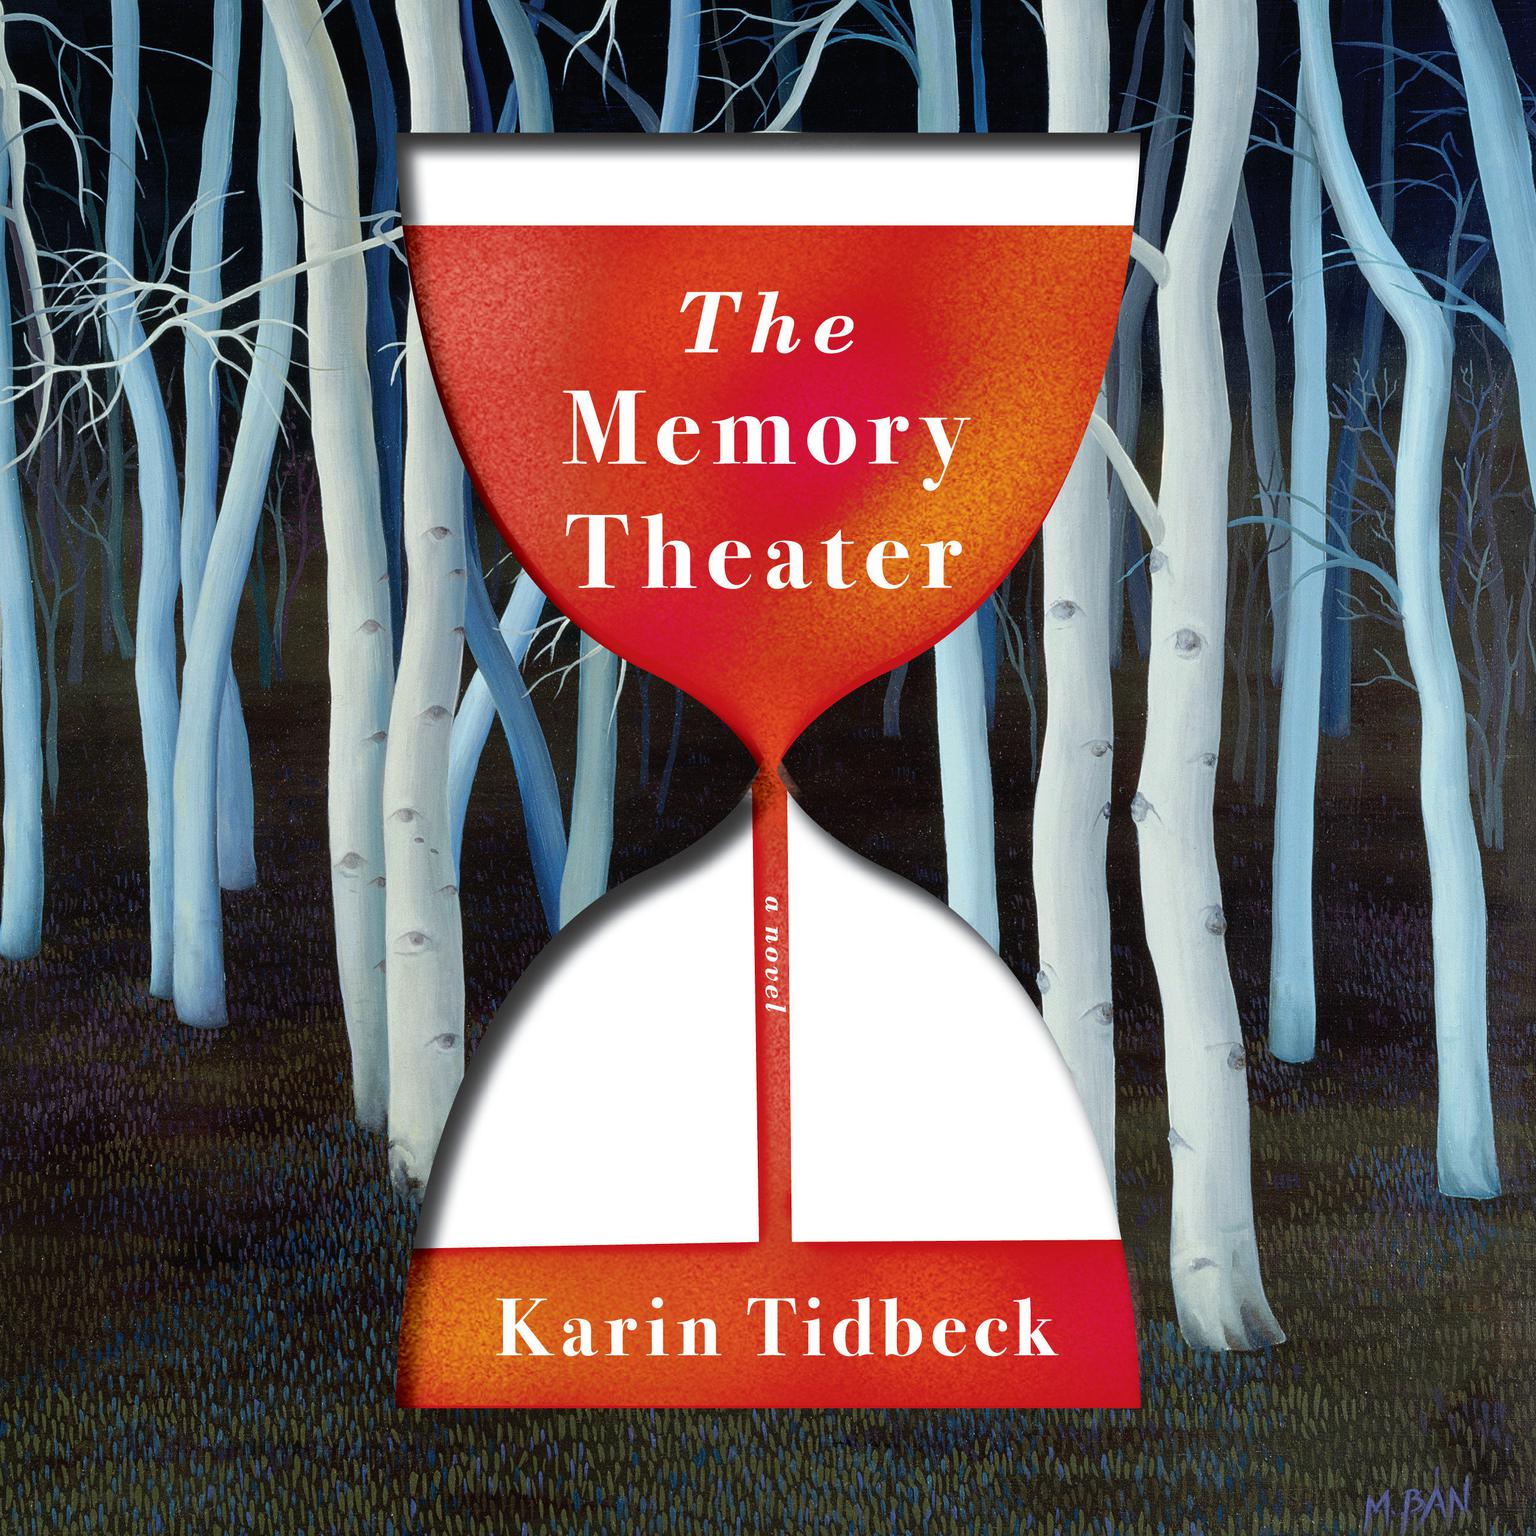 The Memory Theater: A Novel Audiobook, by Karin Tidbeck